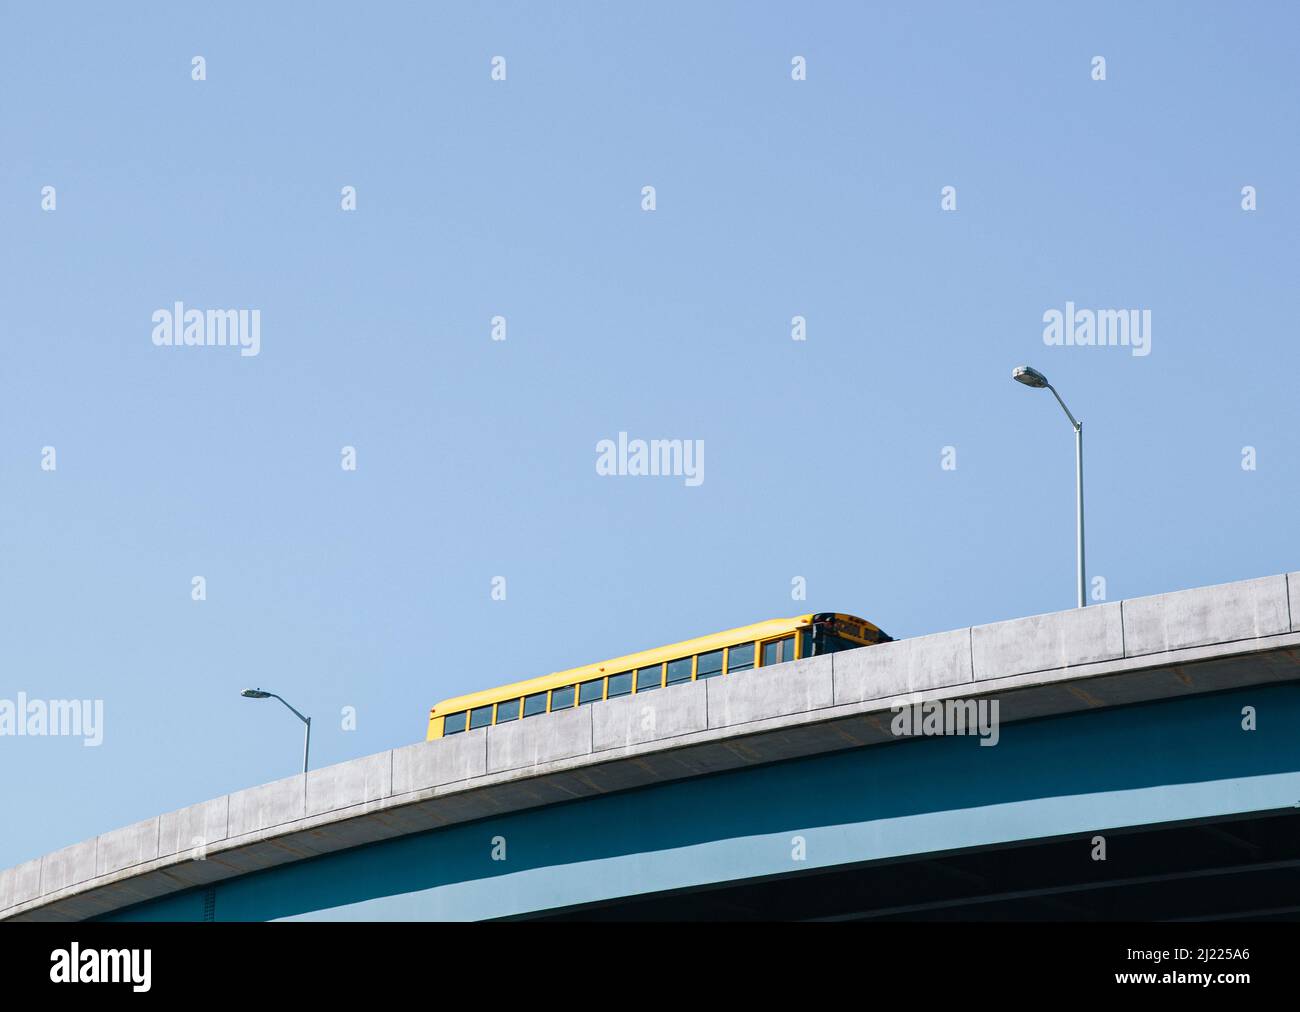 A yellow schoolbus driving over an elevated roadway against a blue sky. Stock Photo